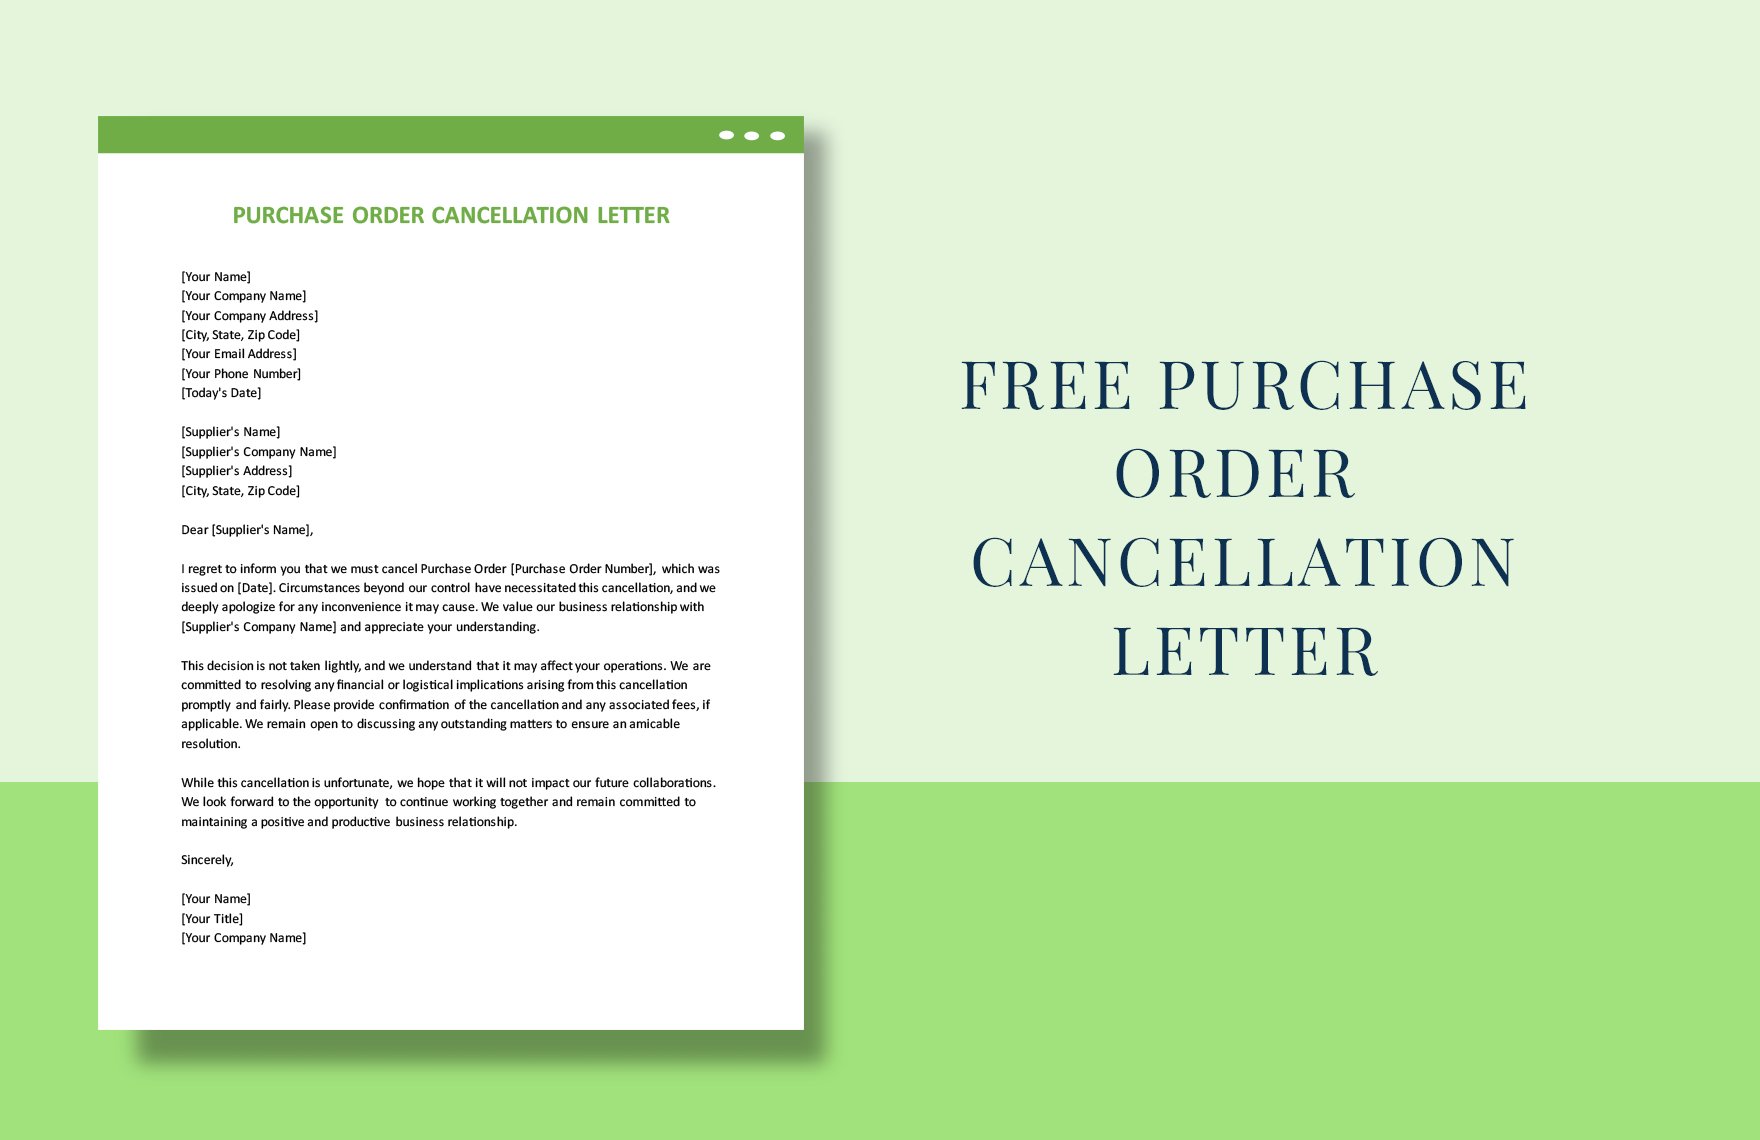 Free Purchase Order Cancellation Letter in Word, Google Docs, PDF, Apple Pages